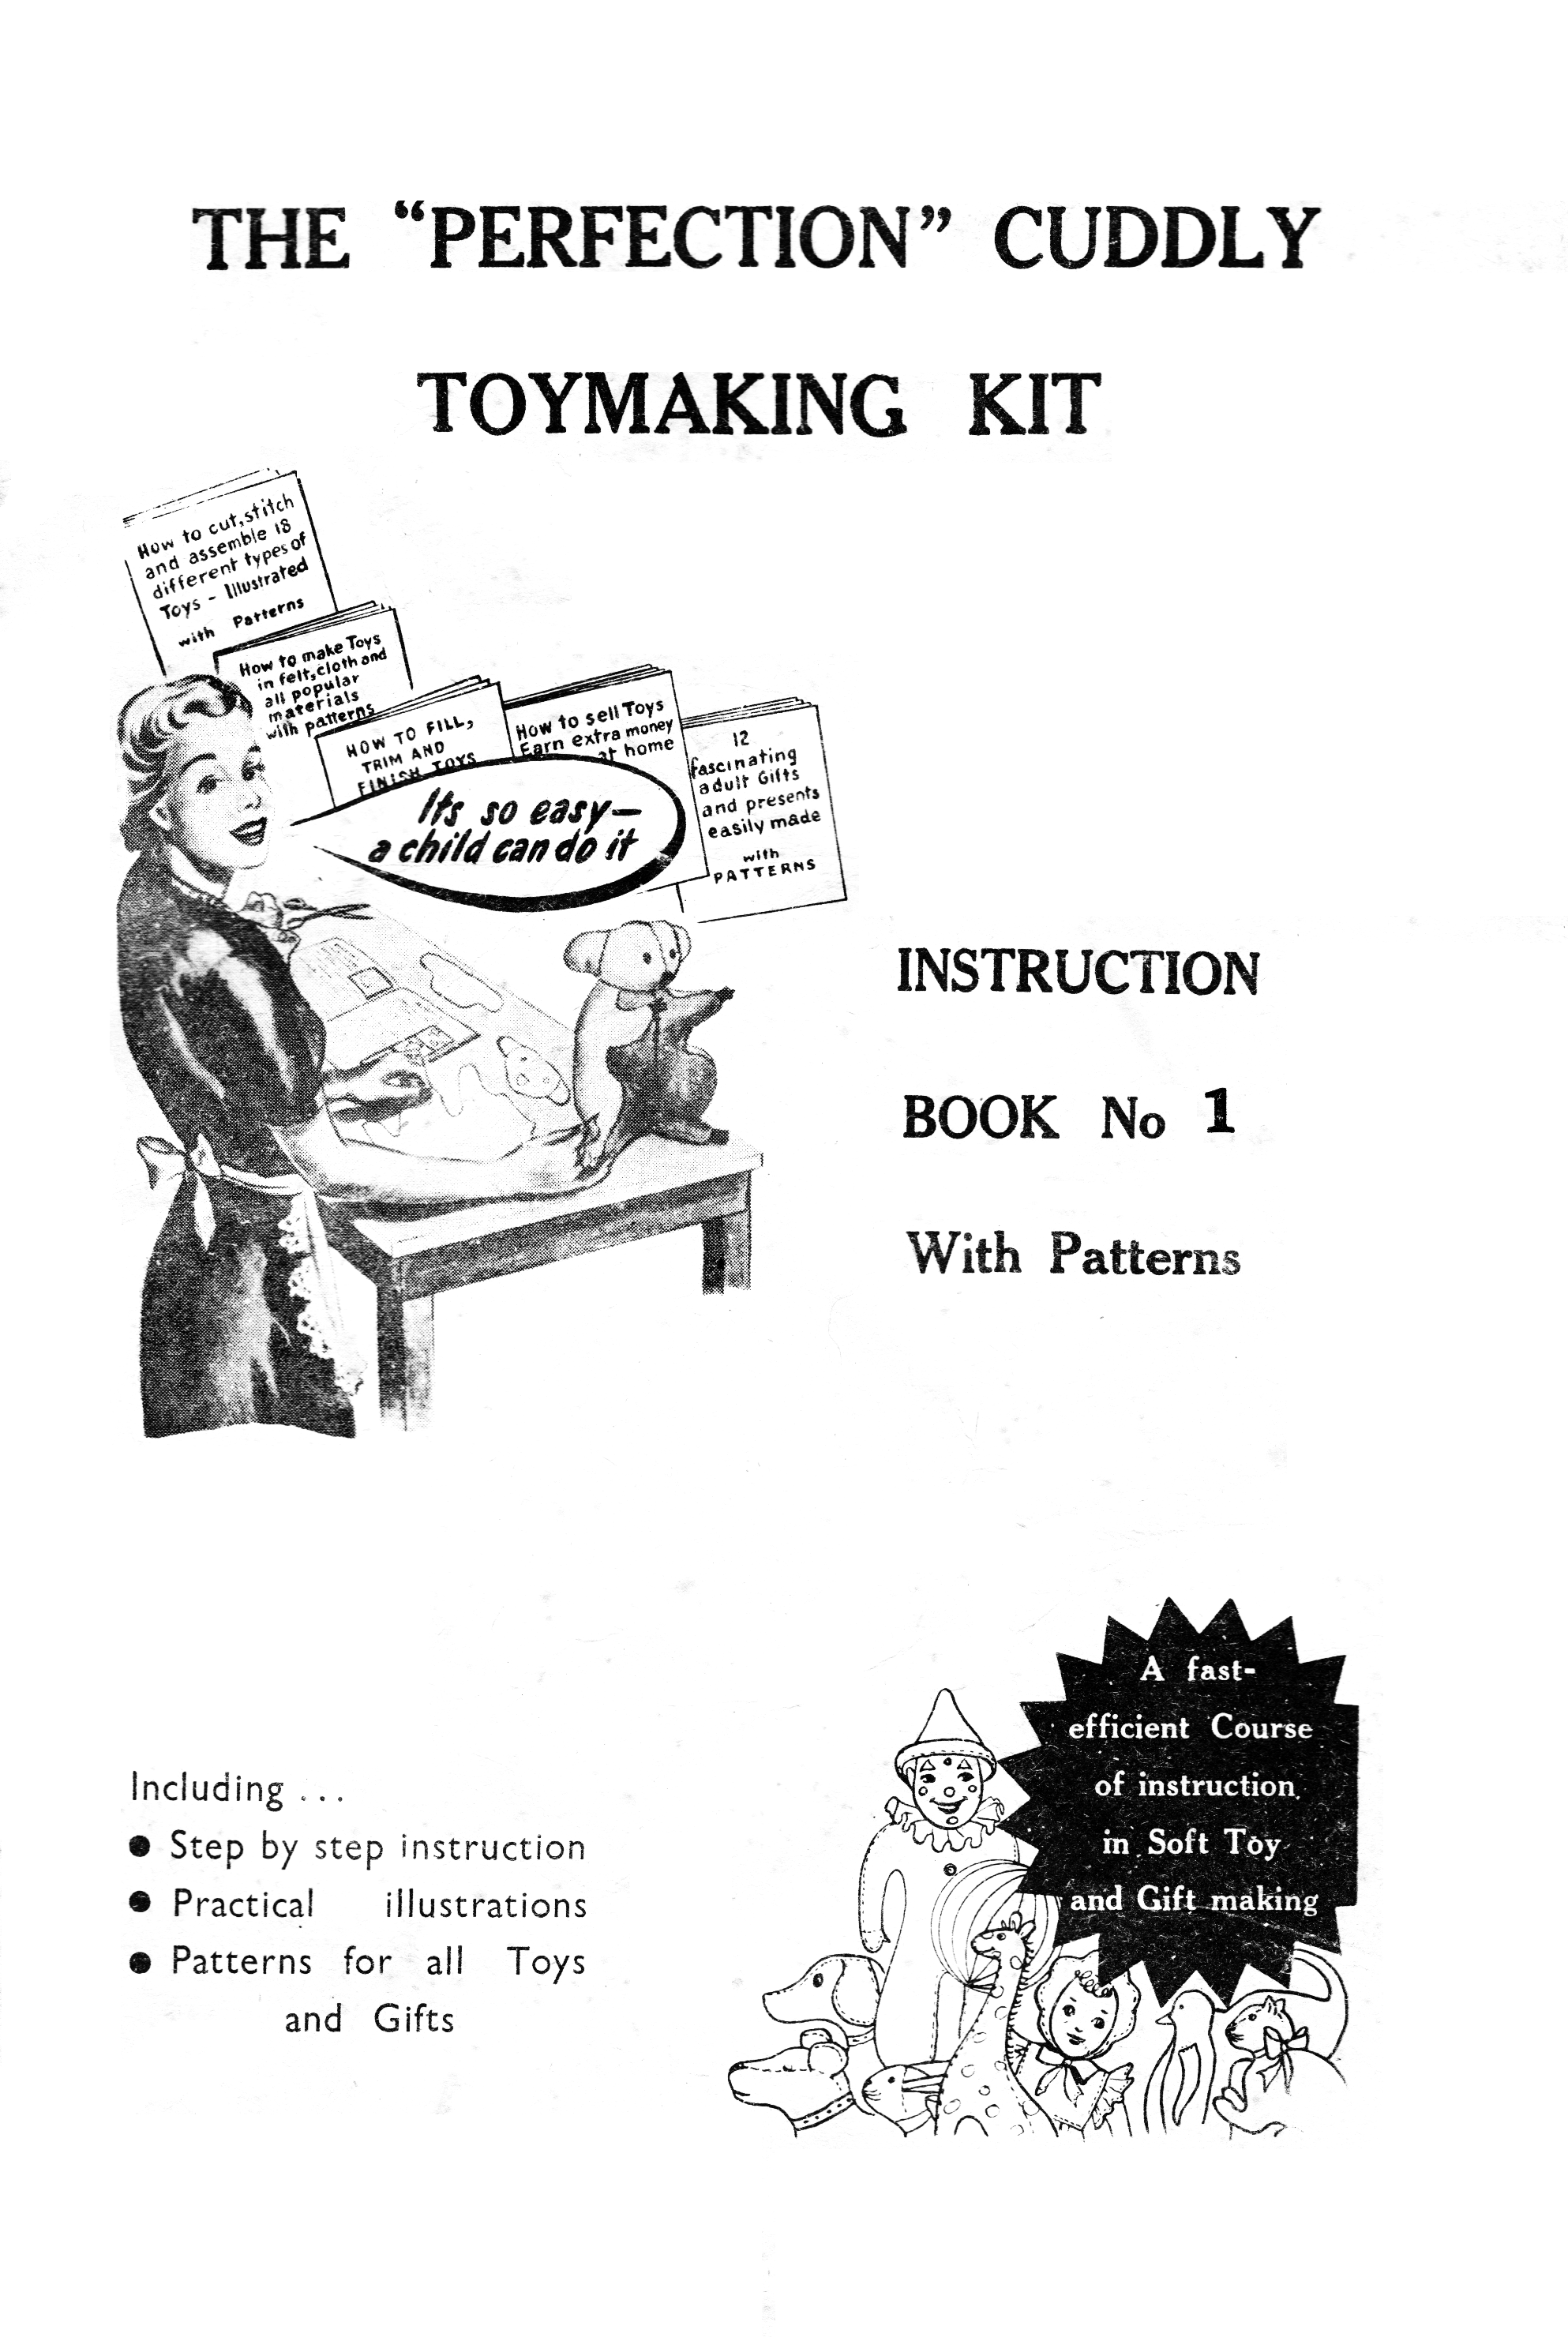 The Perfection Cuddly Toymaking Kit, Book No. 1